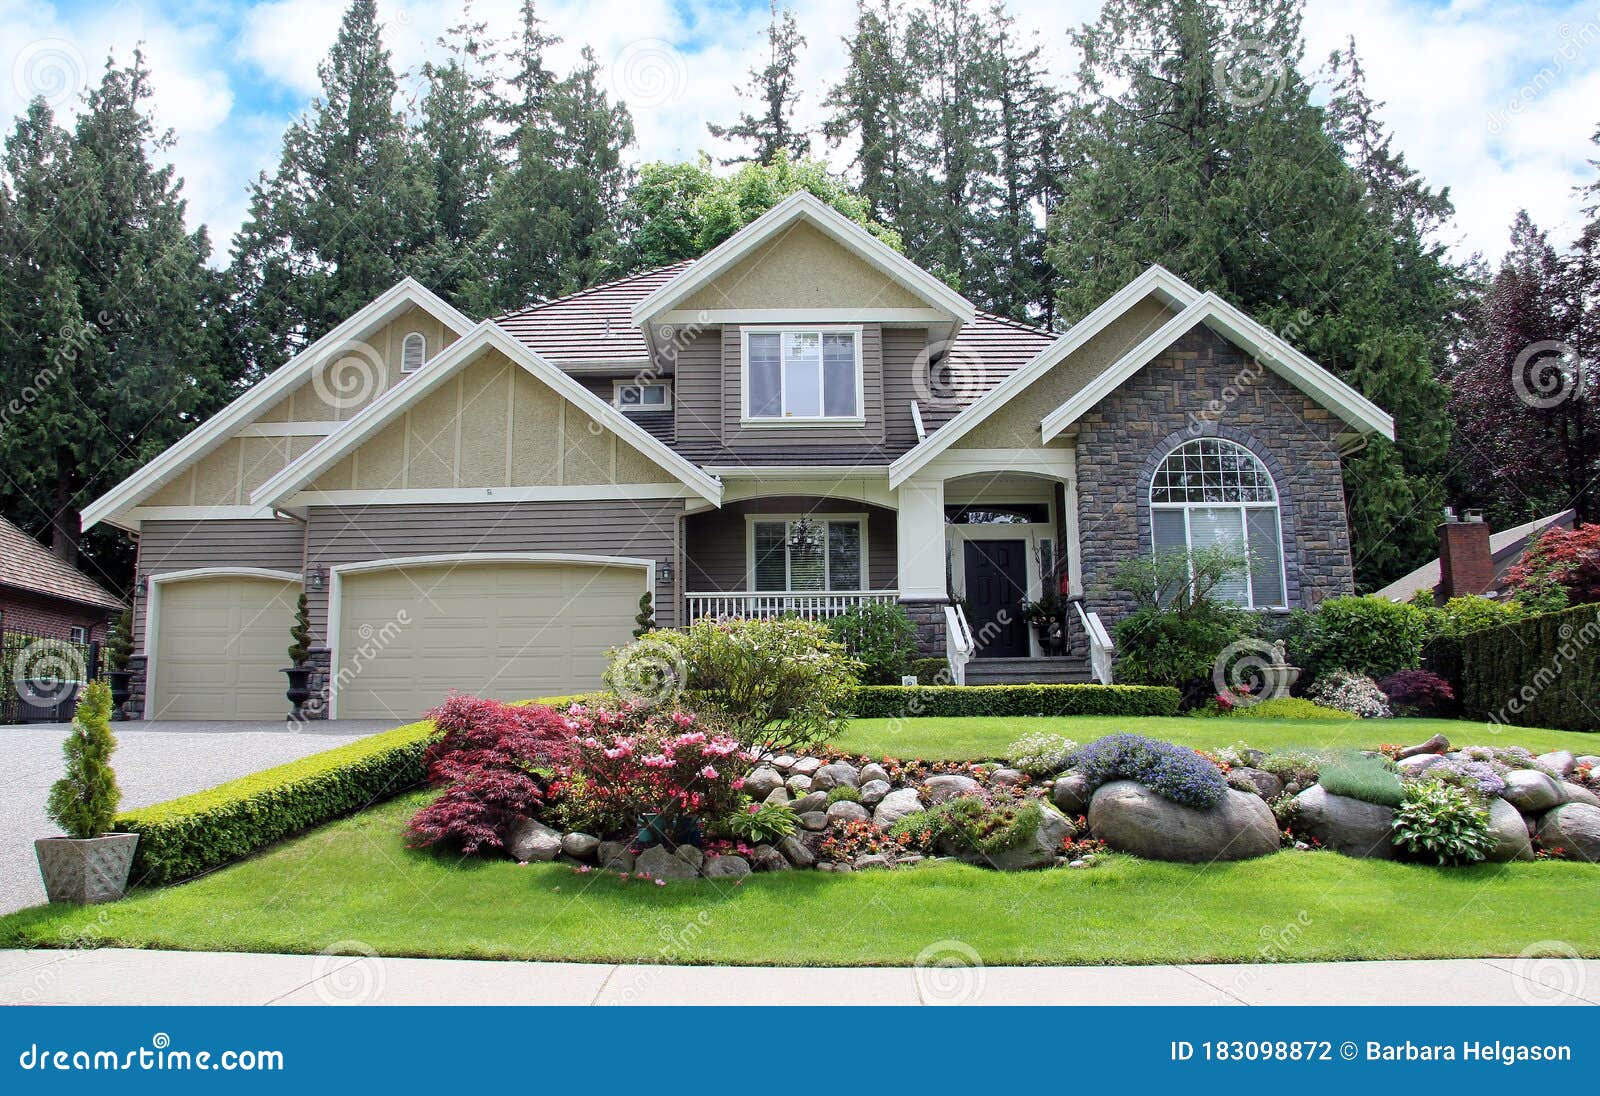 luxurious canadian mansion with a large professionally landscaped front yard